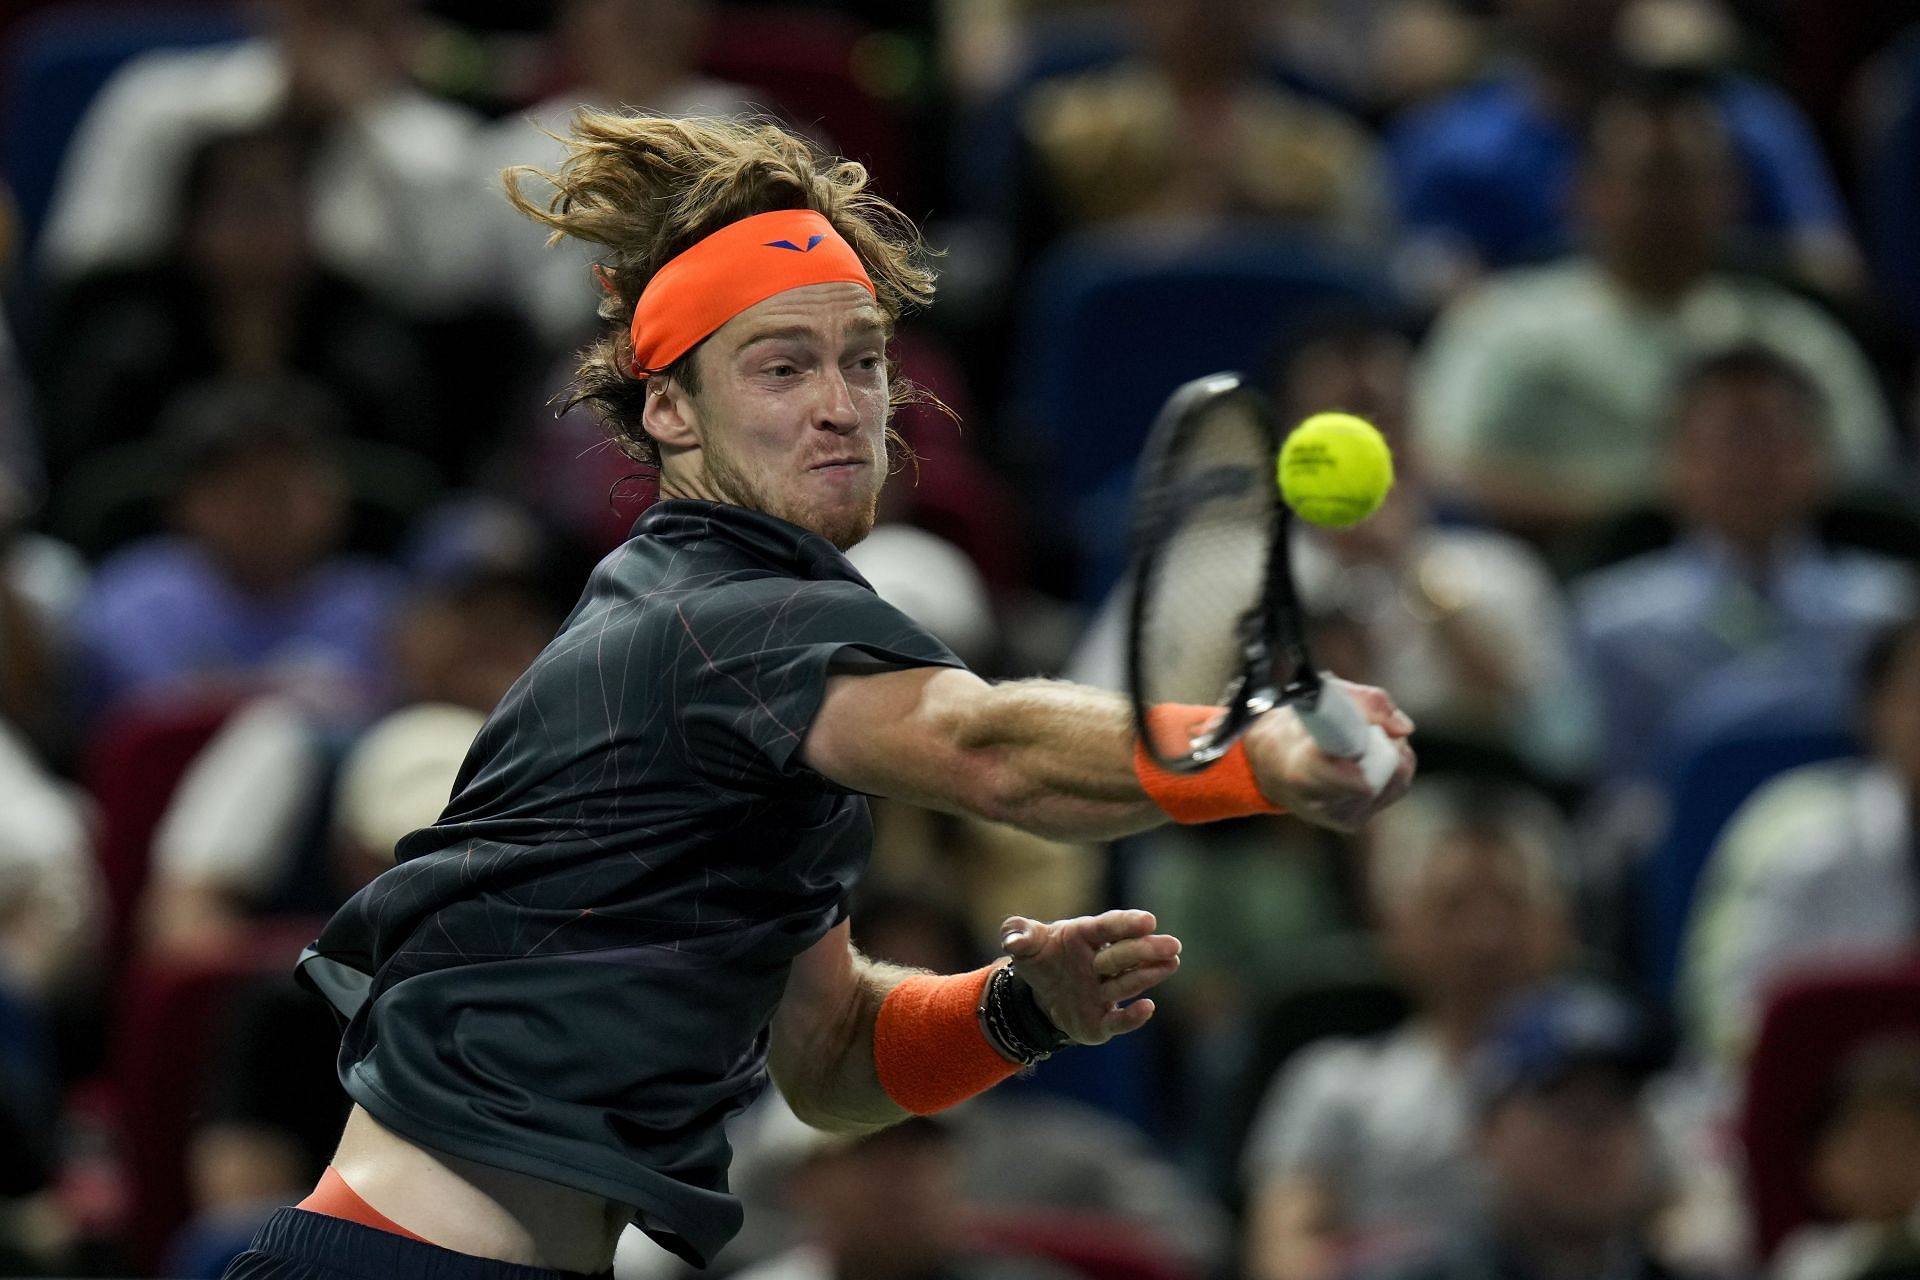 Rublev at the 2023 Shanghai Masters.